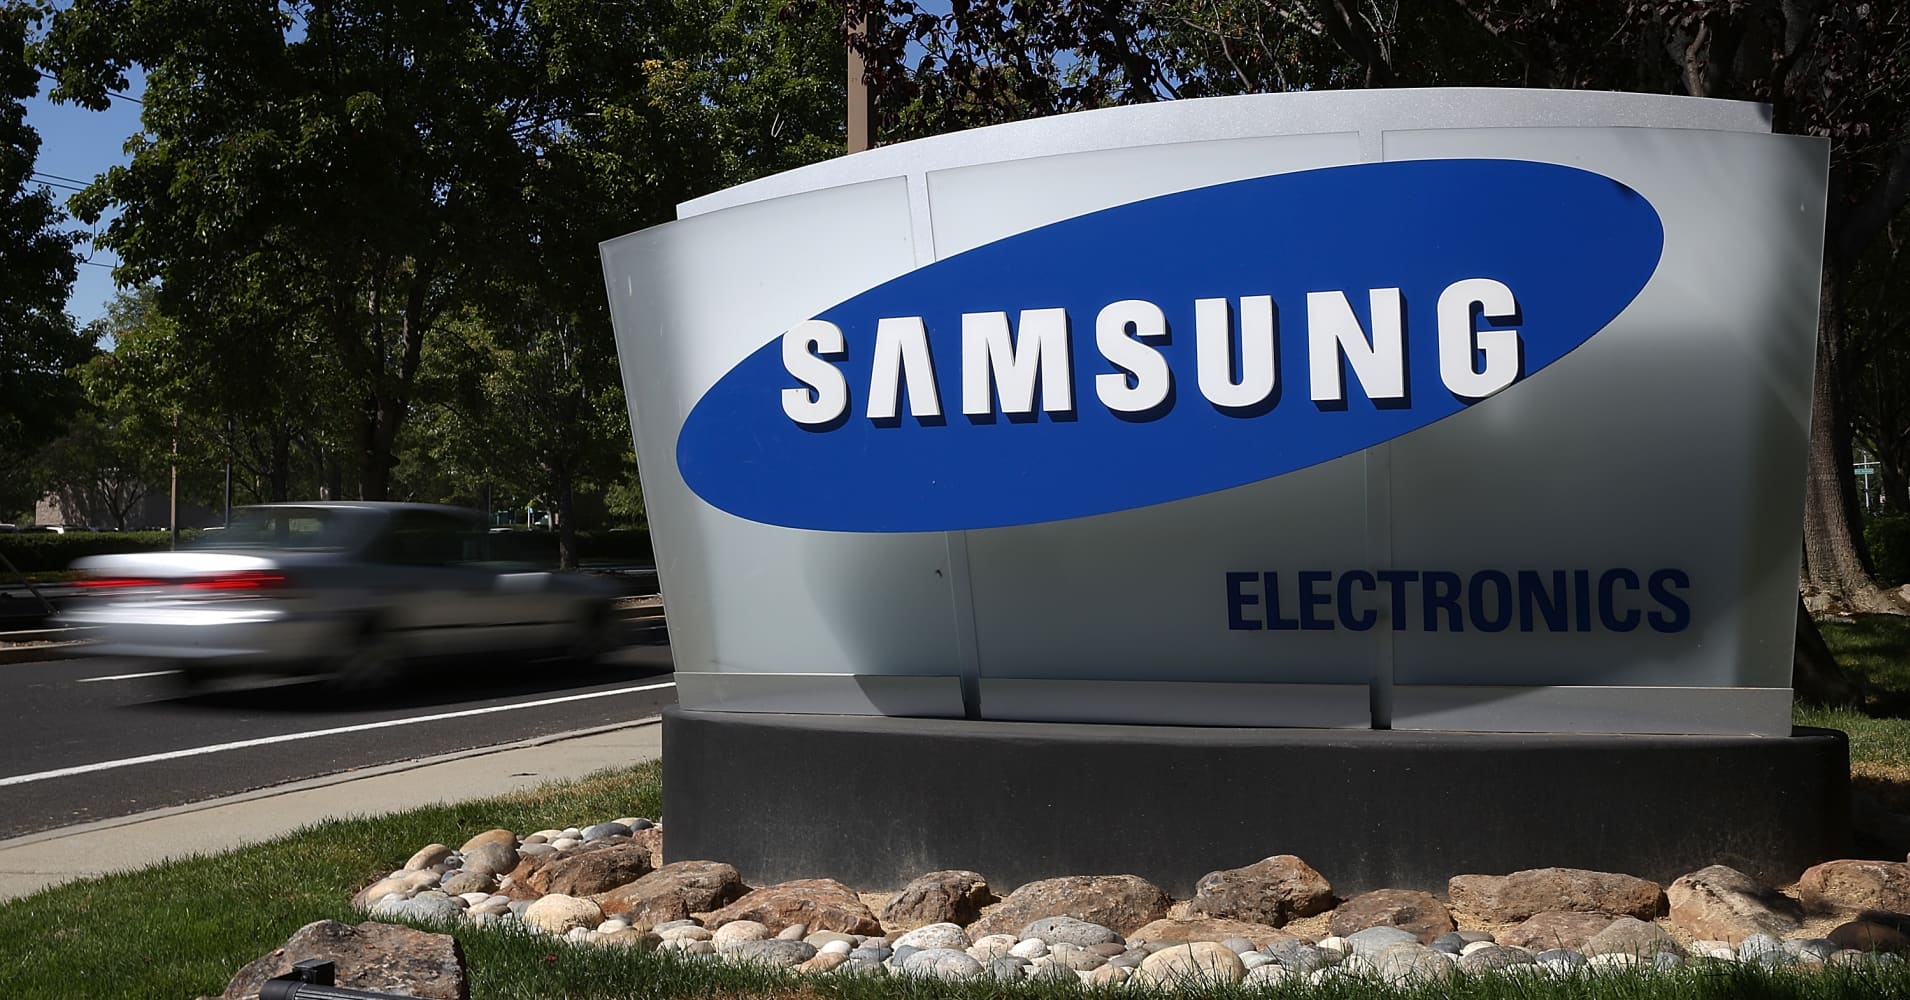 Samsung plans to venture into  self-driving technology - Times of India